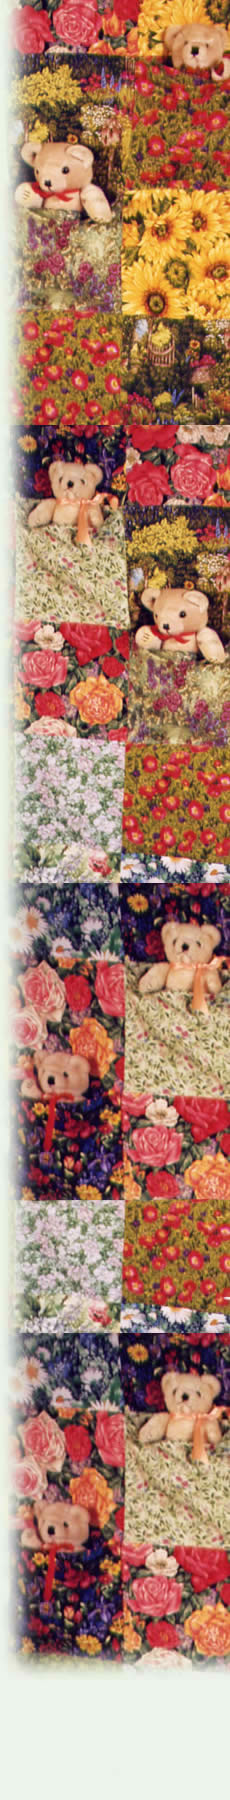 patchwork quilt with teddy bears from Frogs and Snails and Teddy Bear Tales and the Arts Council England logo